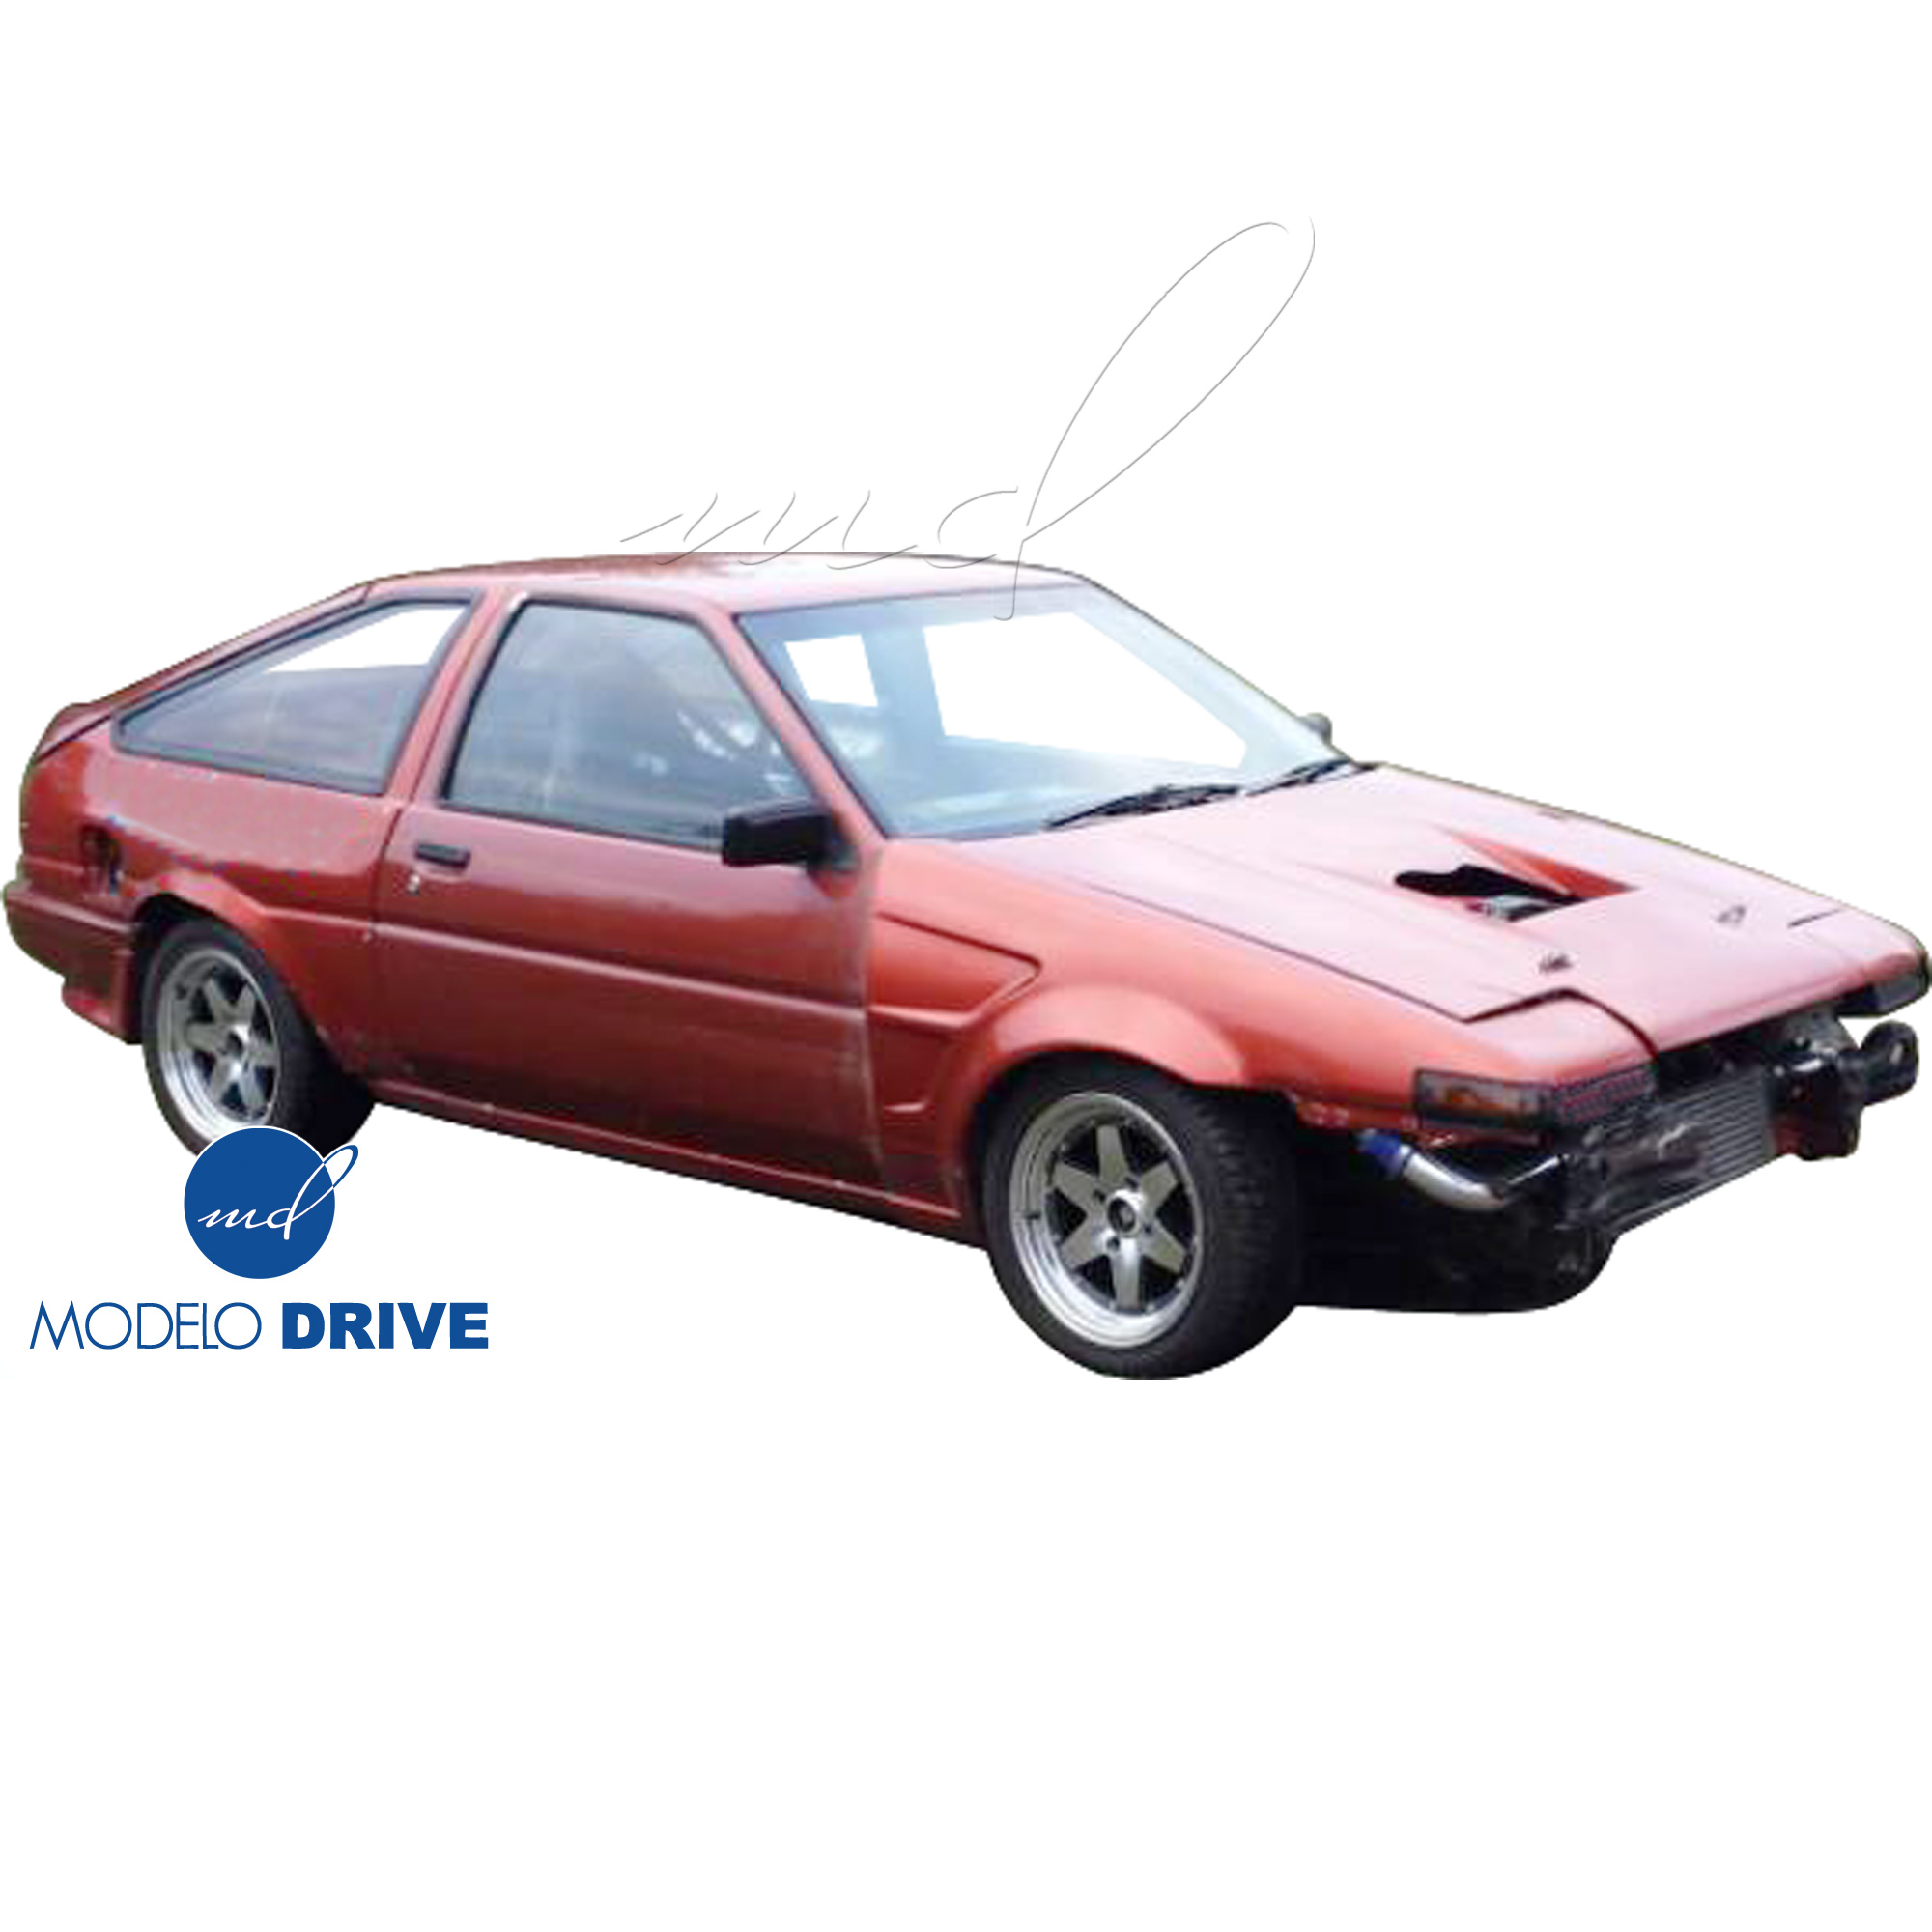 ModeloDrive FRP DMA D1 Wide Body 30mm Fenders (front) > Toyota Corolla AE86 1984-1987 > 2/3dr - Image 10